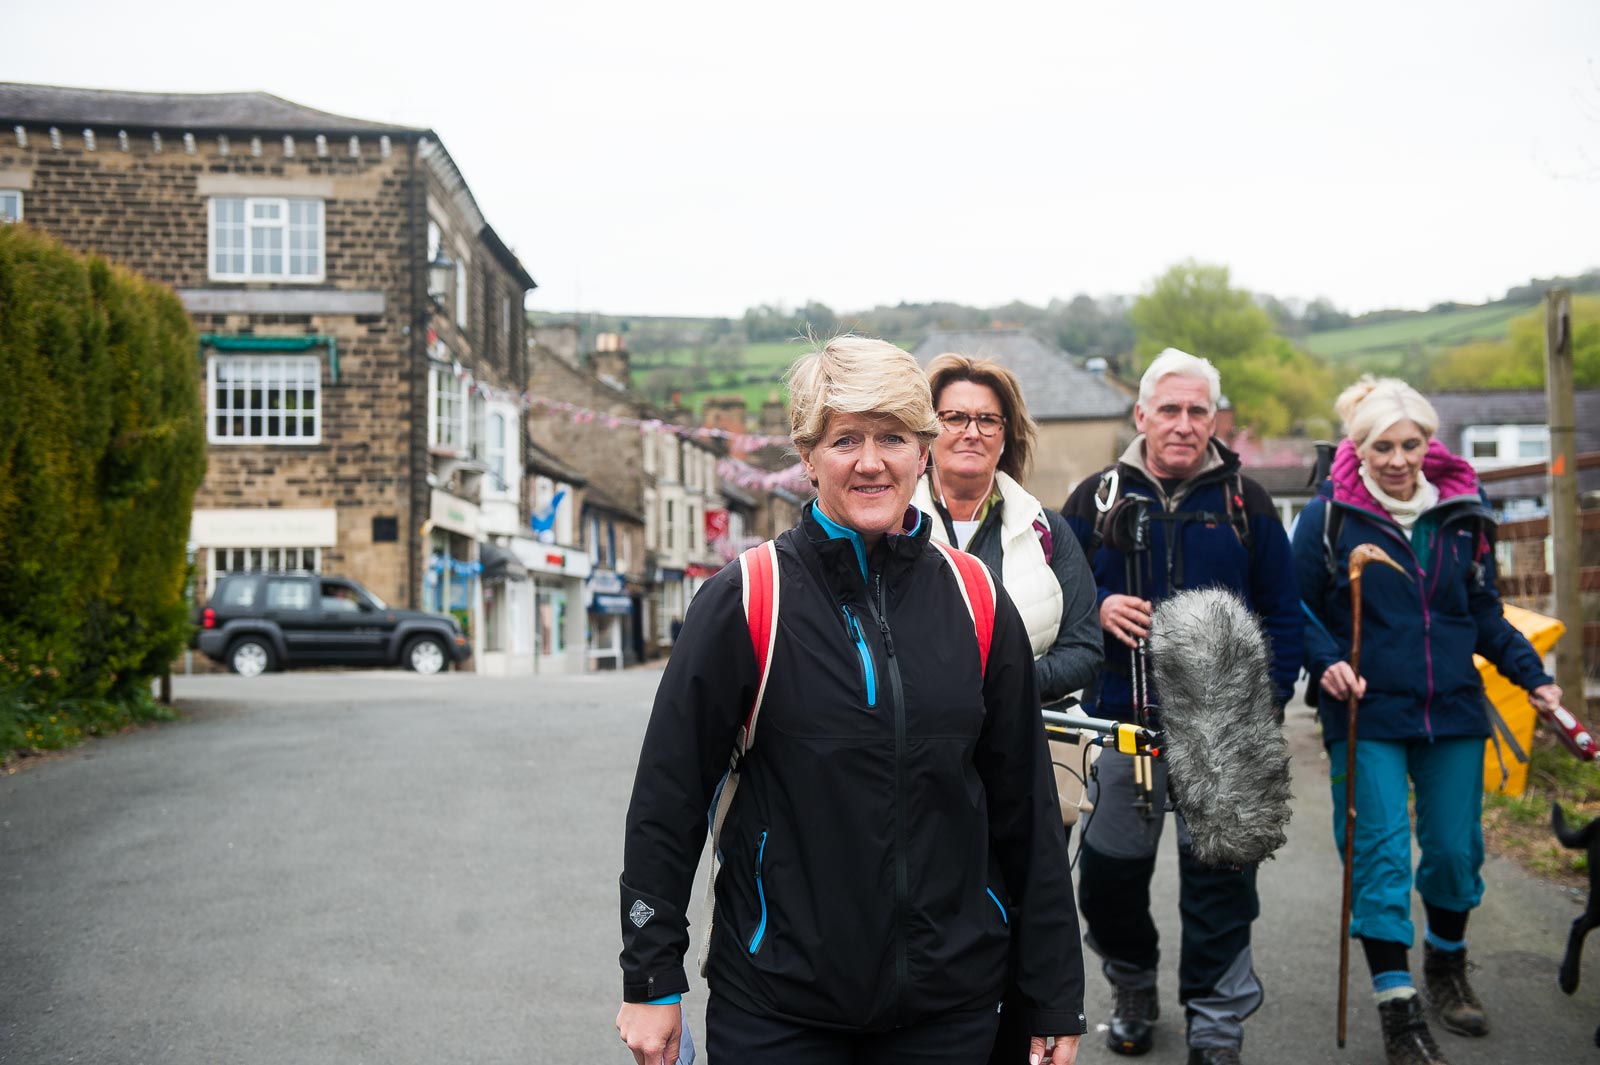 Clare Balding in Pateley Bridge at the start of the Nidderdale Way